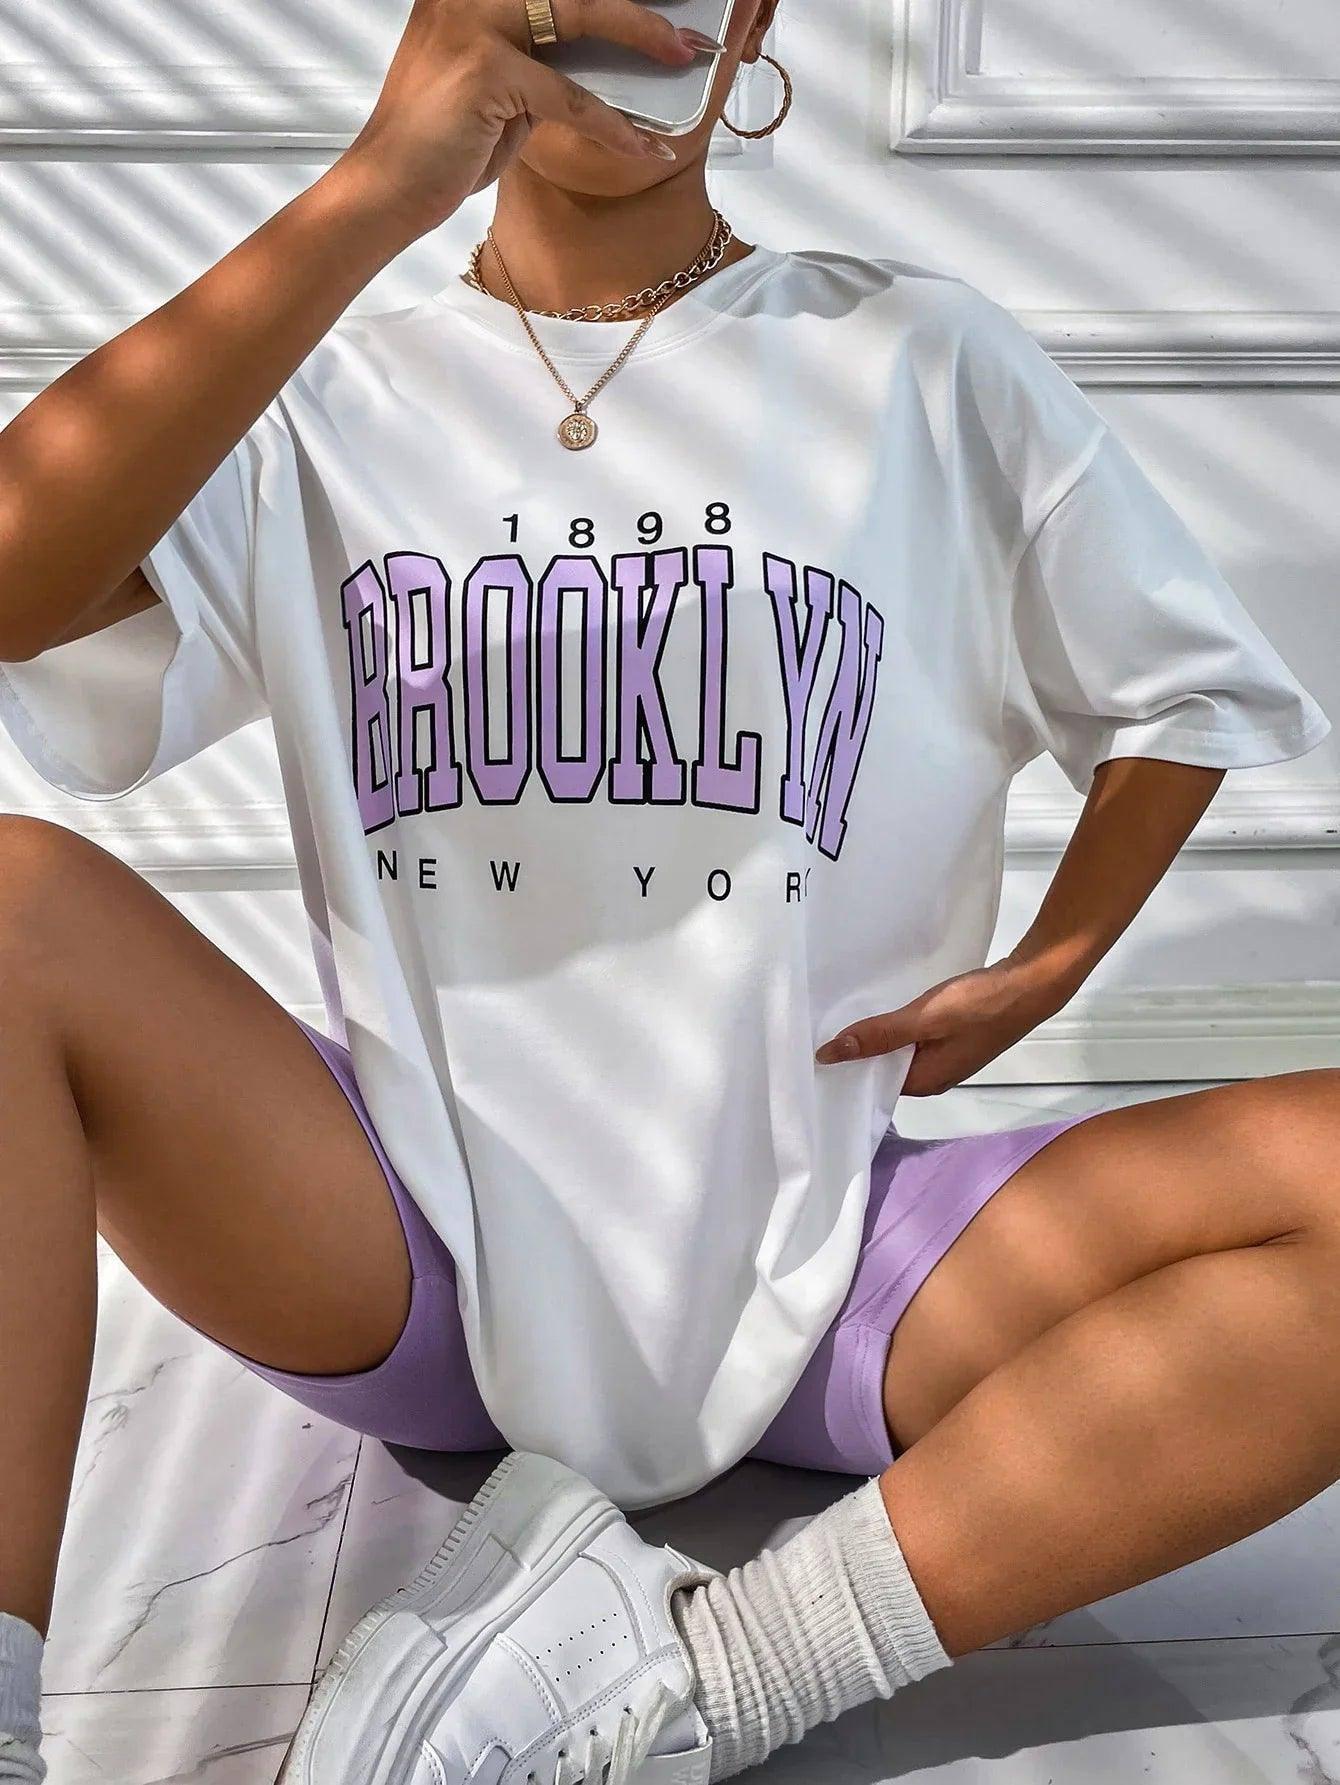 Vintage 1898 Brooklyn New York Womens T-Shirts Oversize-S18345-White-4